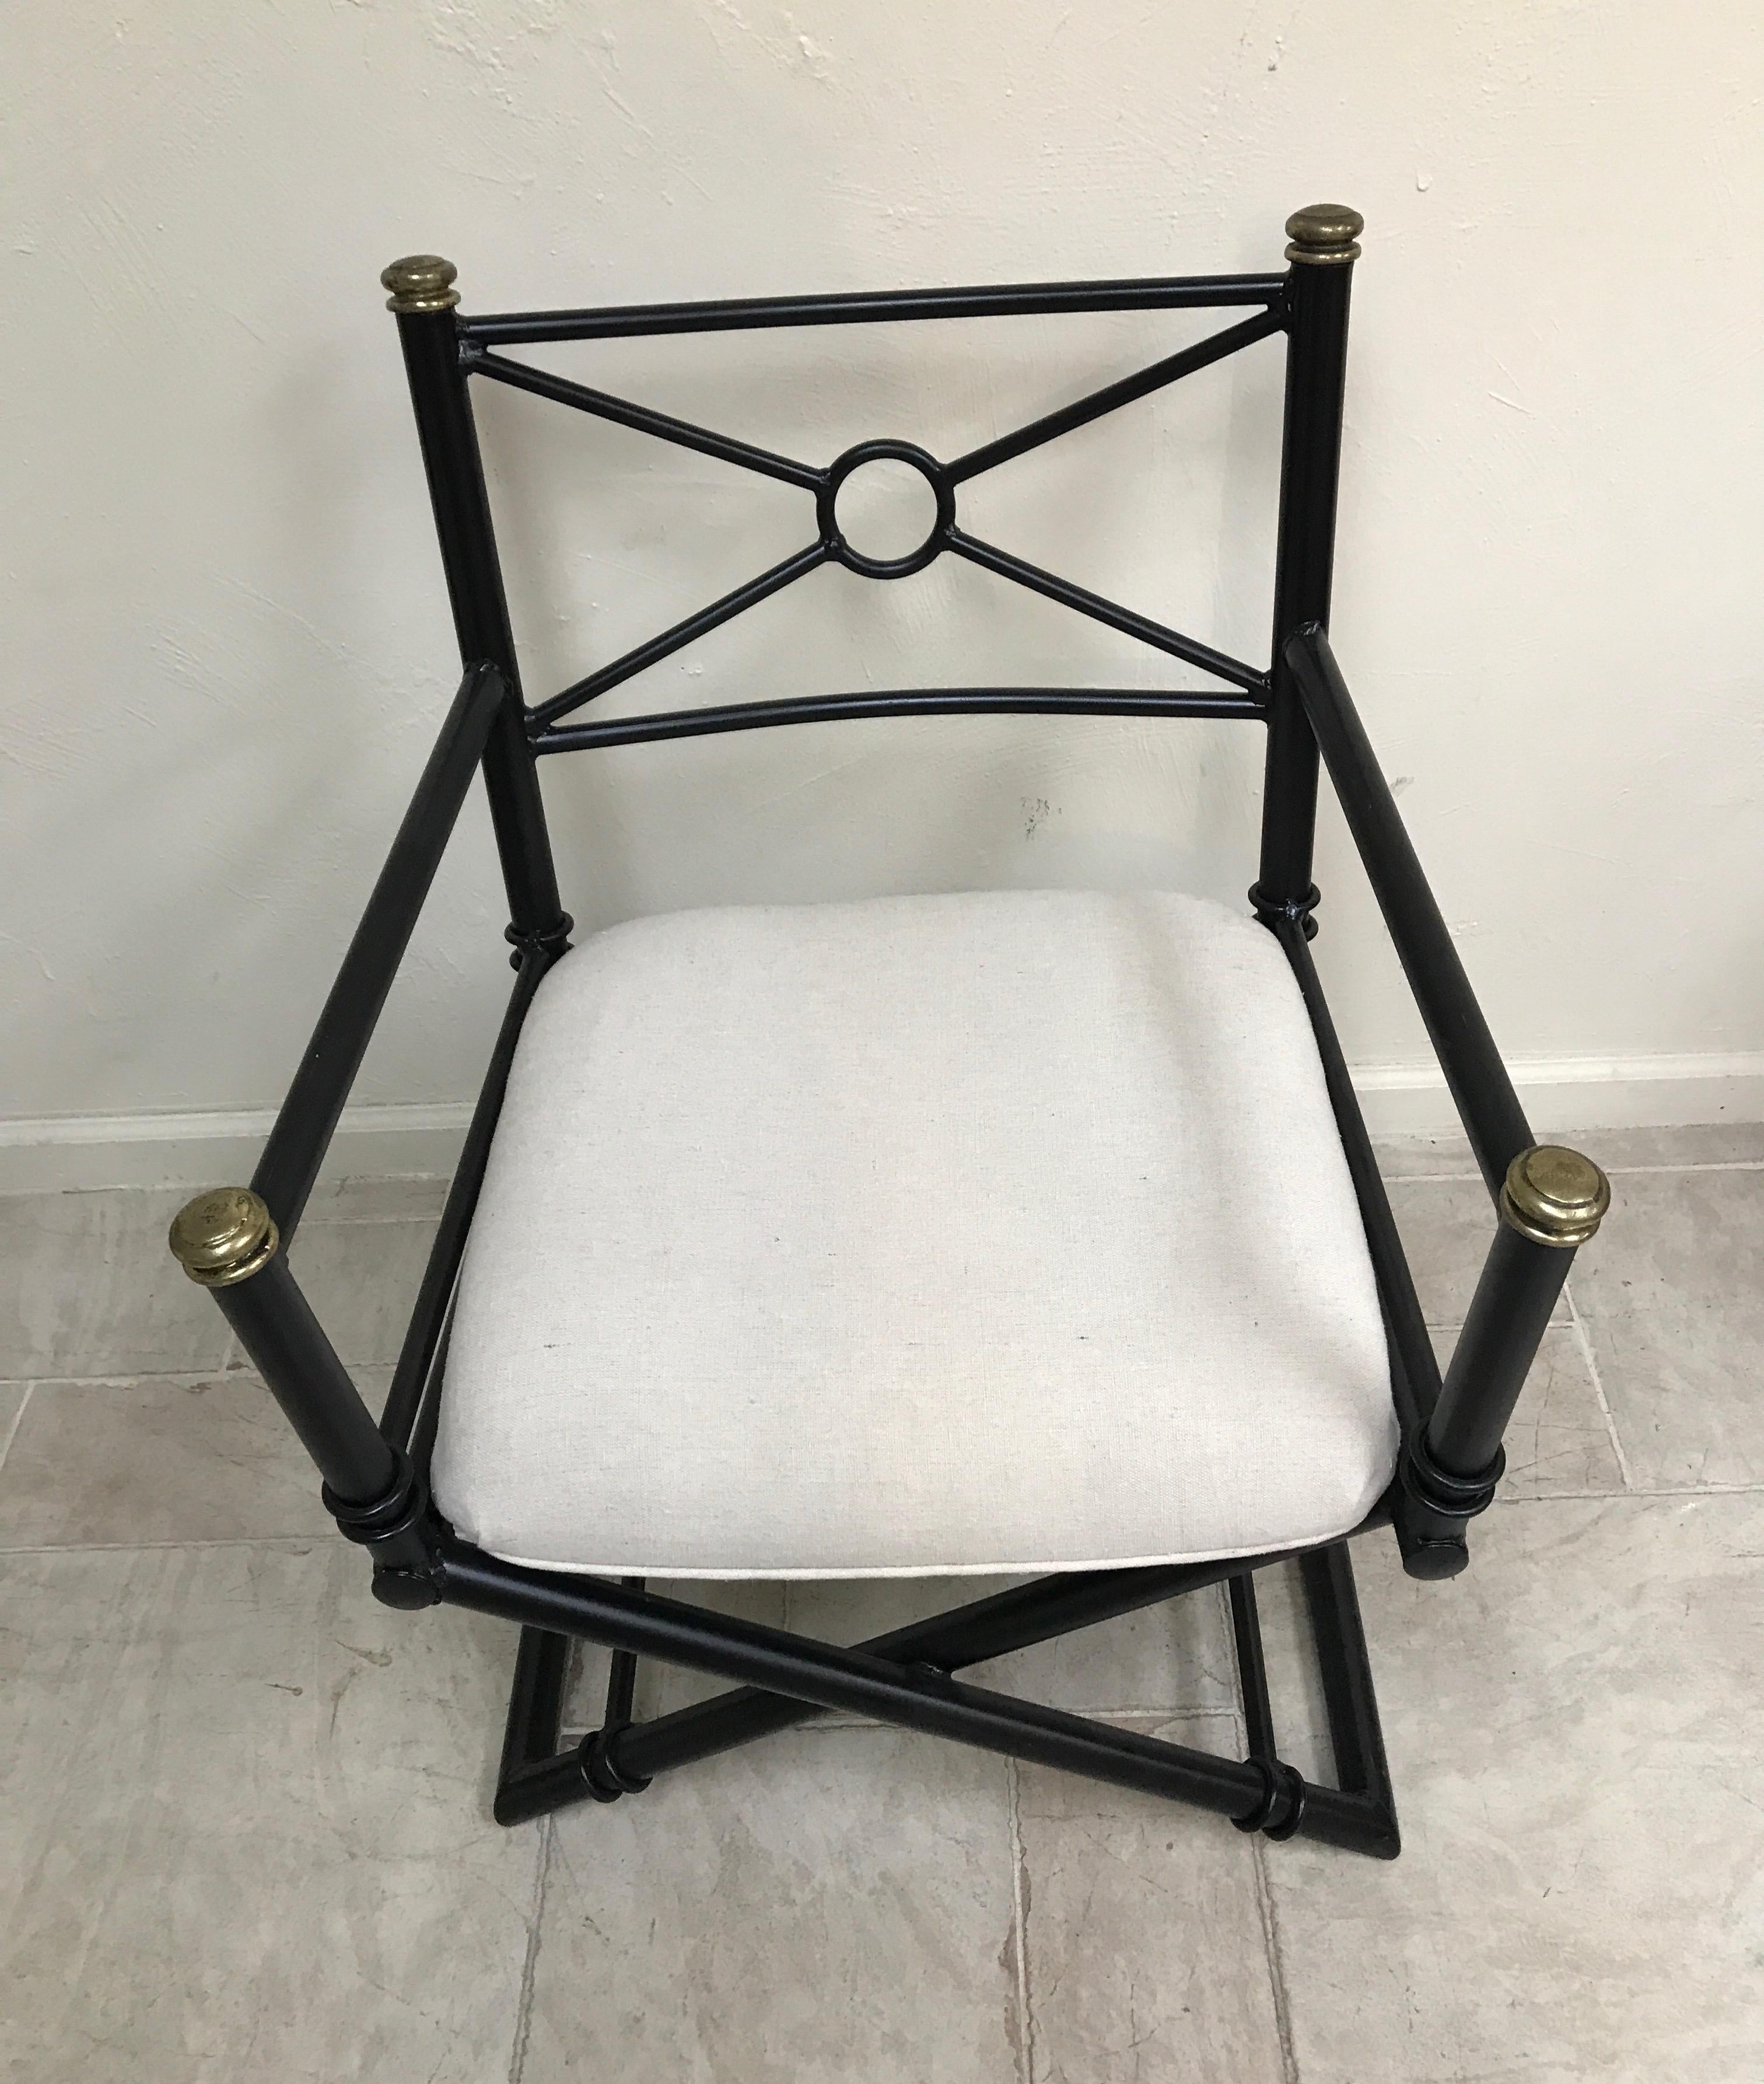 Black painted iron campaign chair with brass accents.